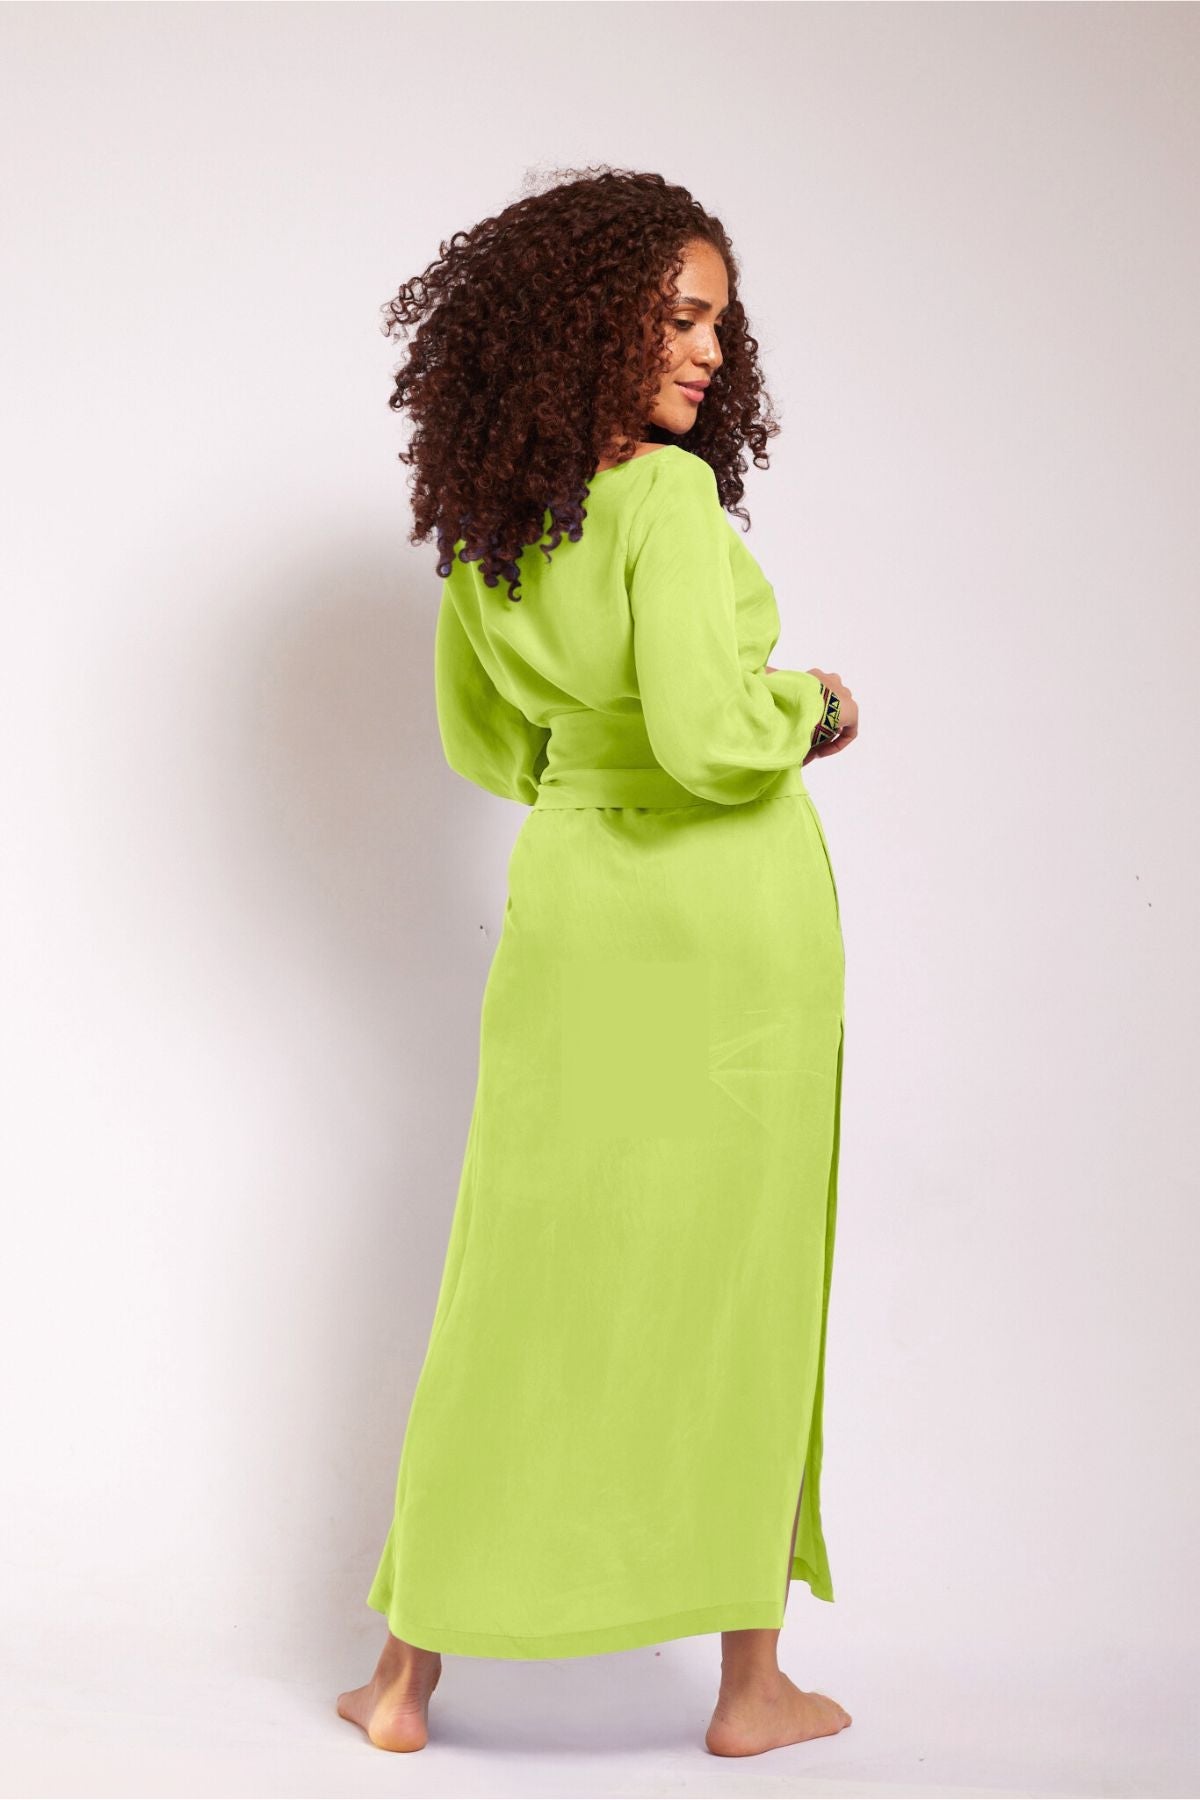 side view of woman modelling a bright yellow kaftan duster with embroidered sleeves made from recycled materials 3